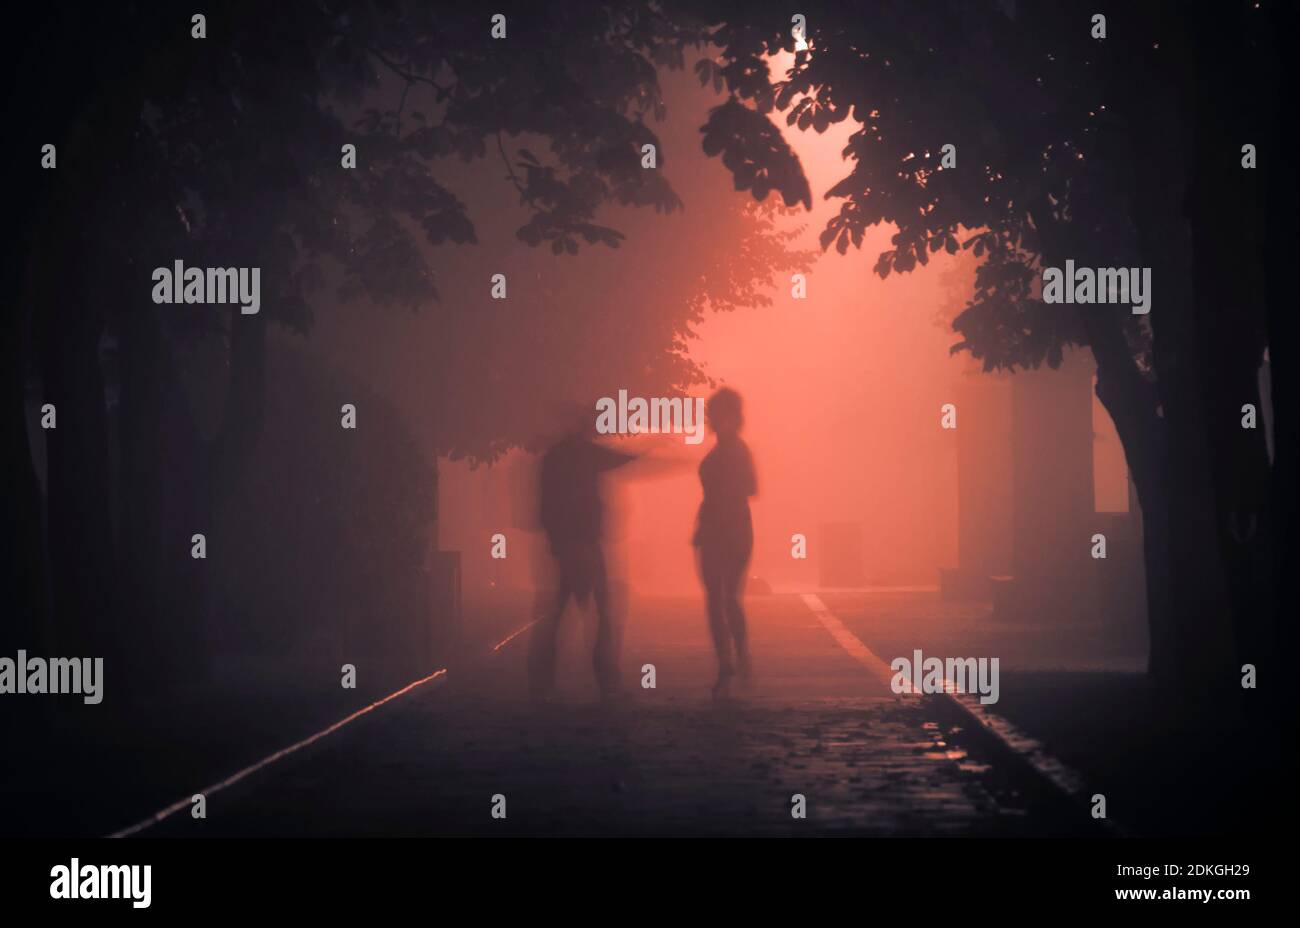 A maniac on a foggy street at night attacks a passerby. Stock Photo